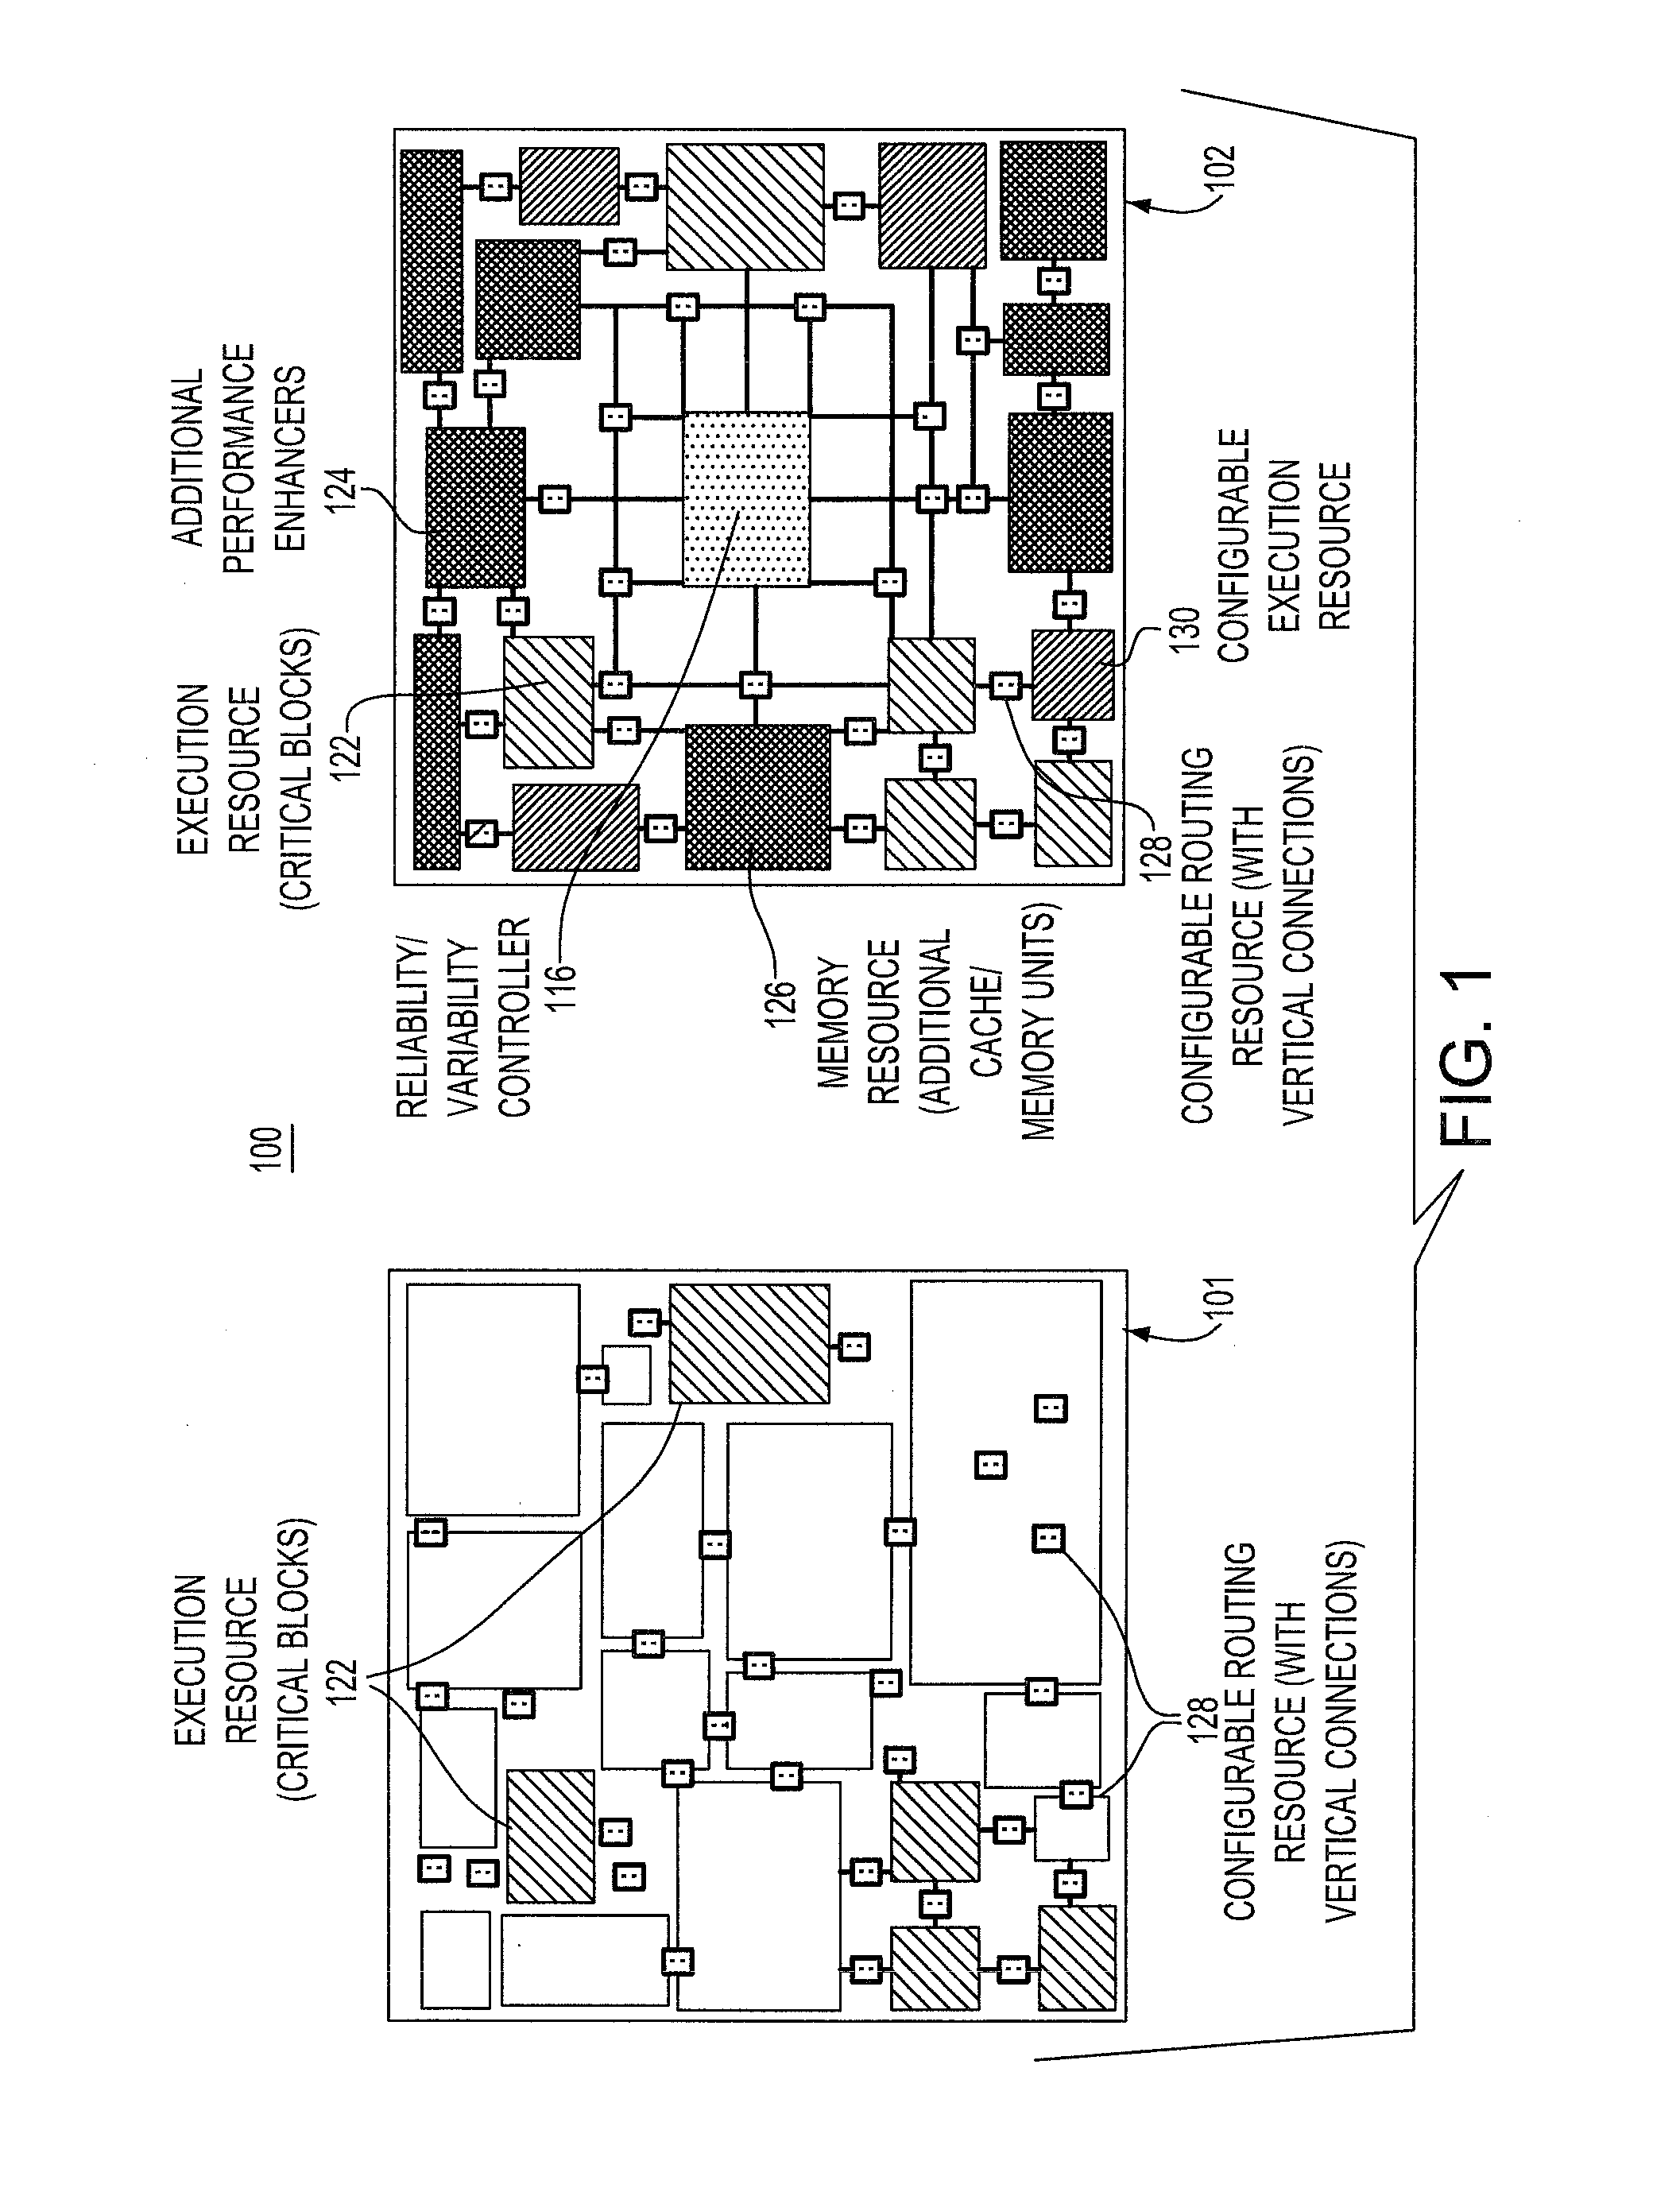 Method and on-chip control apparatus for enhancing process reliability and process variability through 3D integration